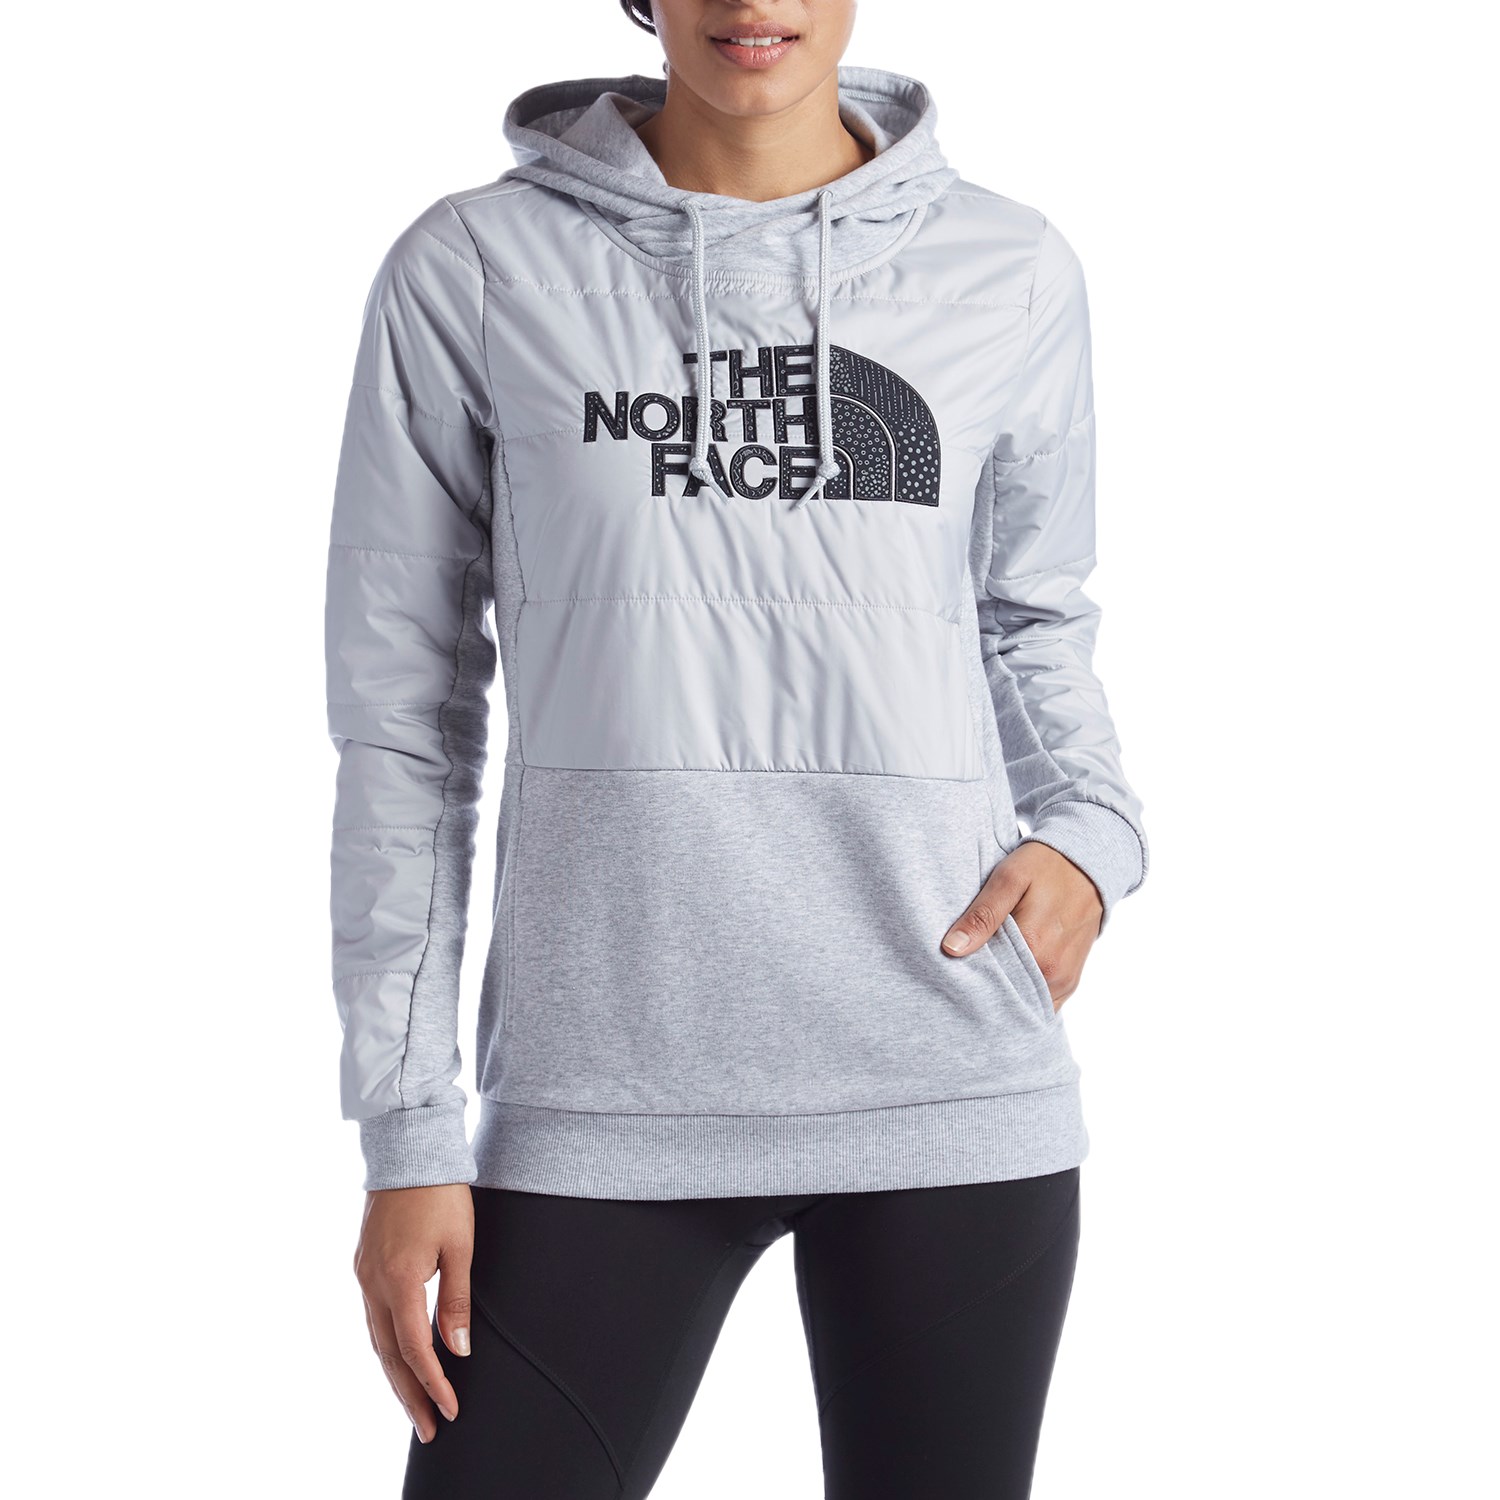 The North Face Reflective Pullover Hoodie Women S Evo